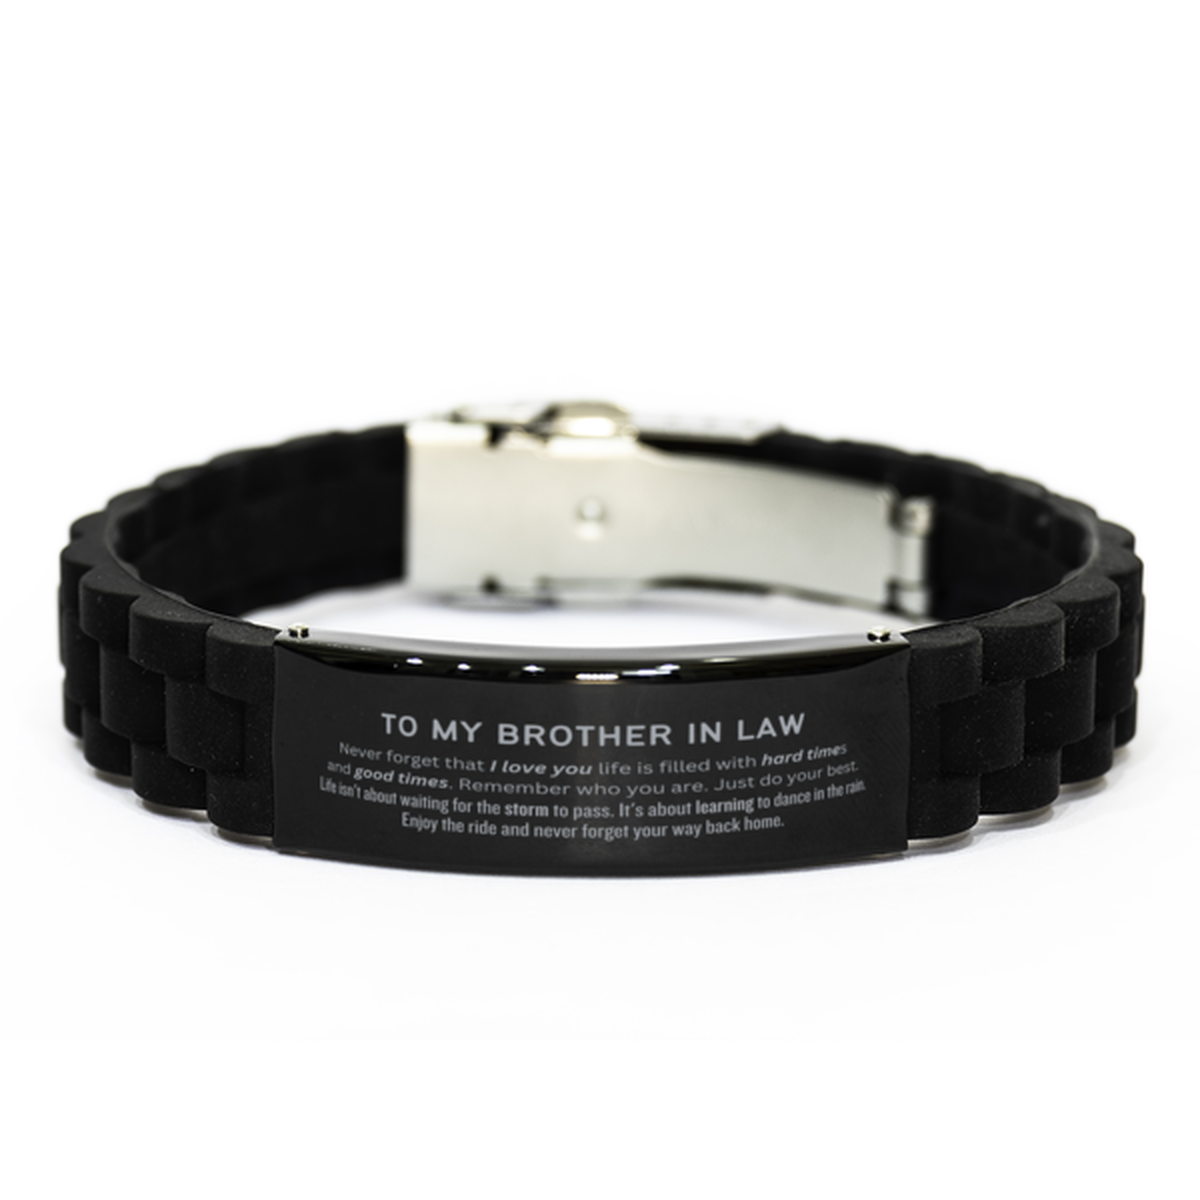 Christmas Brother In Law Black Glidelock Clasp Bracelet Gifts, To My Brother In Law Birthday Thank You Gifts For Brother In Law, Graduation Unique Gifts For Brother In Law To My Brother In Law Never forget that I love you life is filled with hard times an